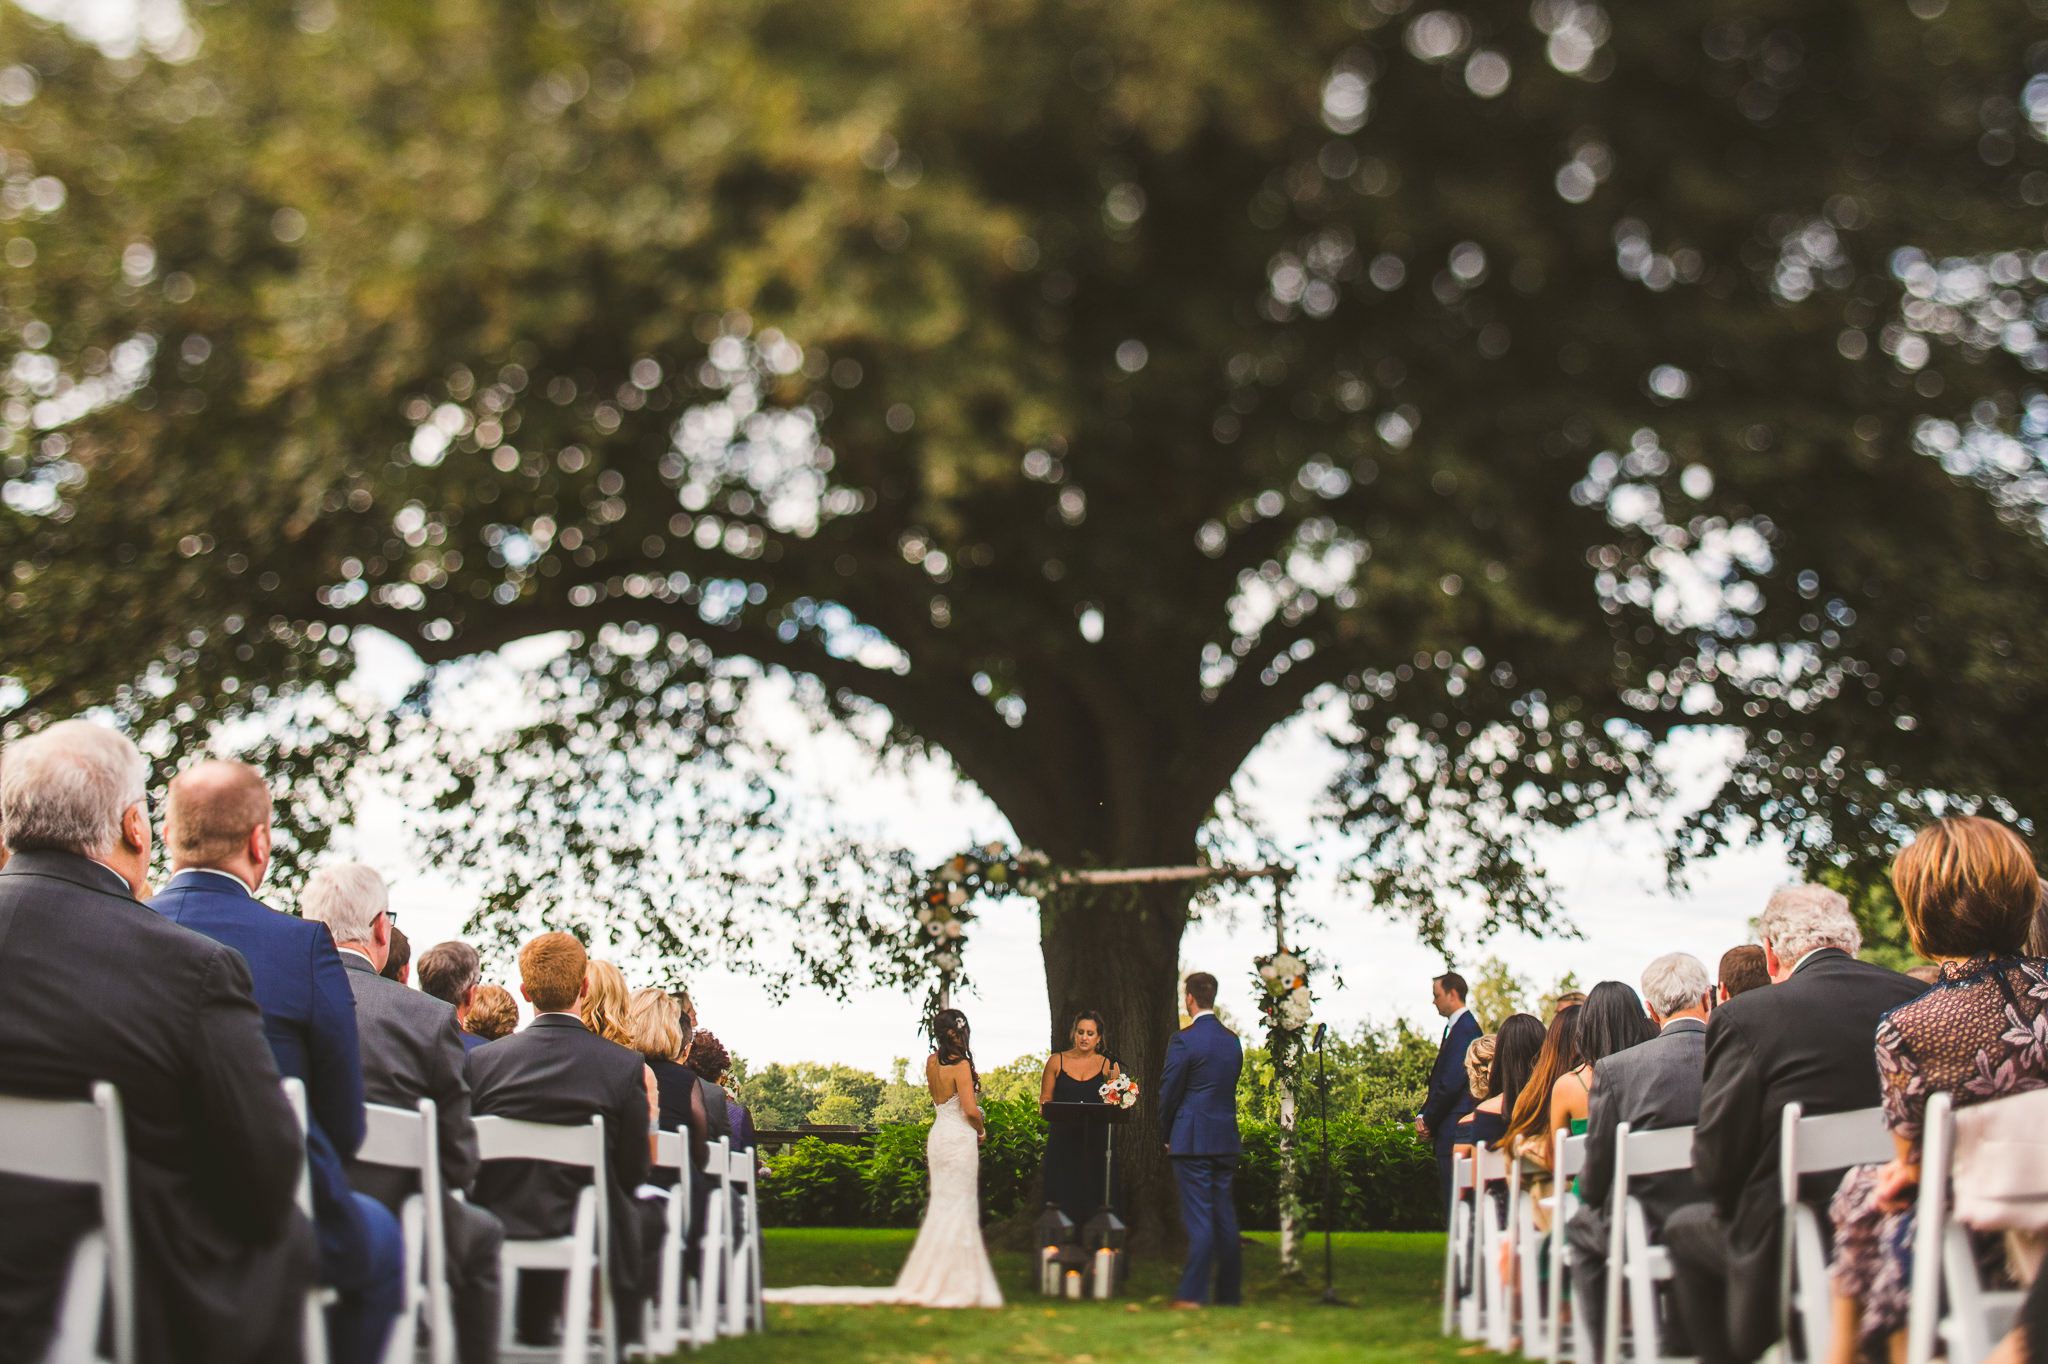  A tilt shift image taken of the ceremony as they listen to the officiant discuss marriage and vows. 

Scenes from Lisa and Colin's Long Island, New York Wedding at the New York Institute of Technology de Seversky Mansion.  